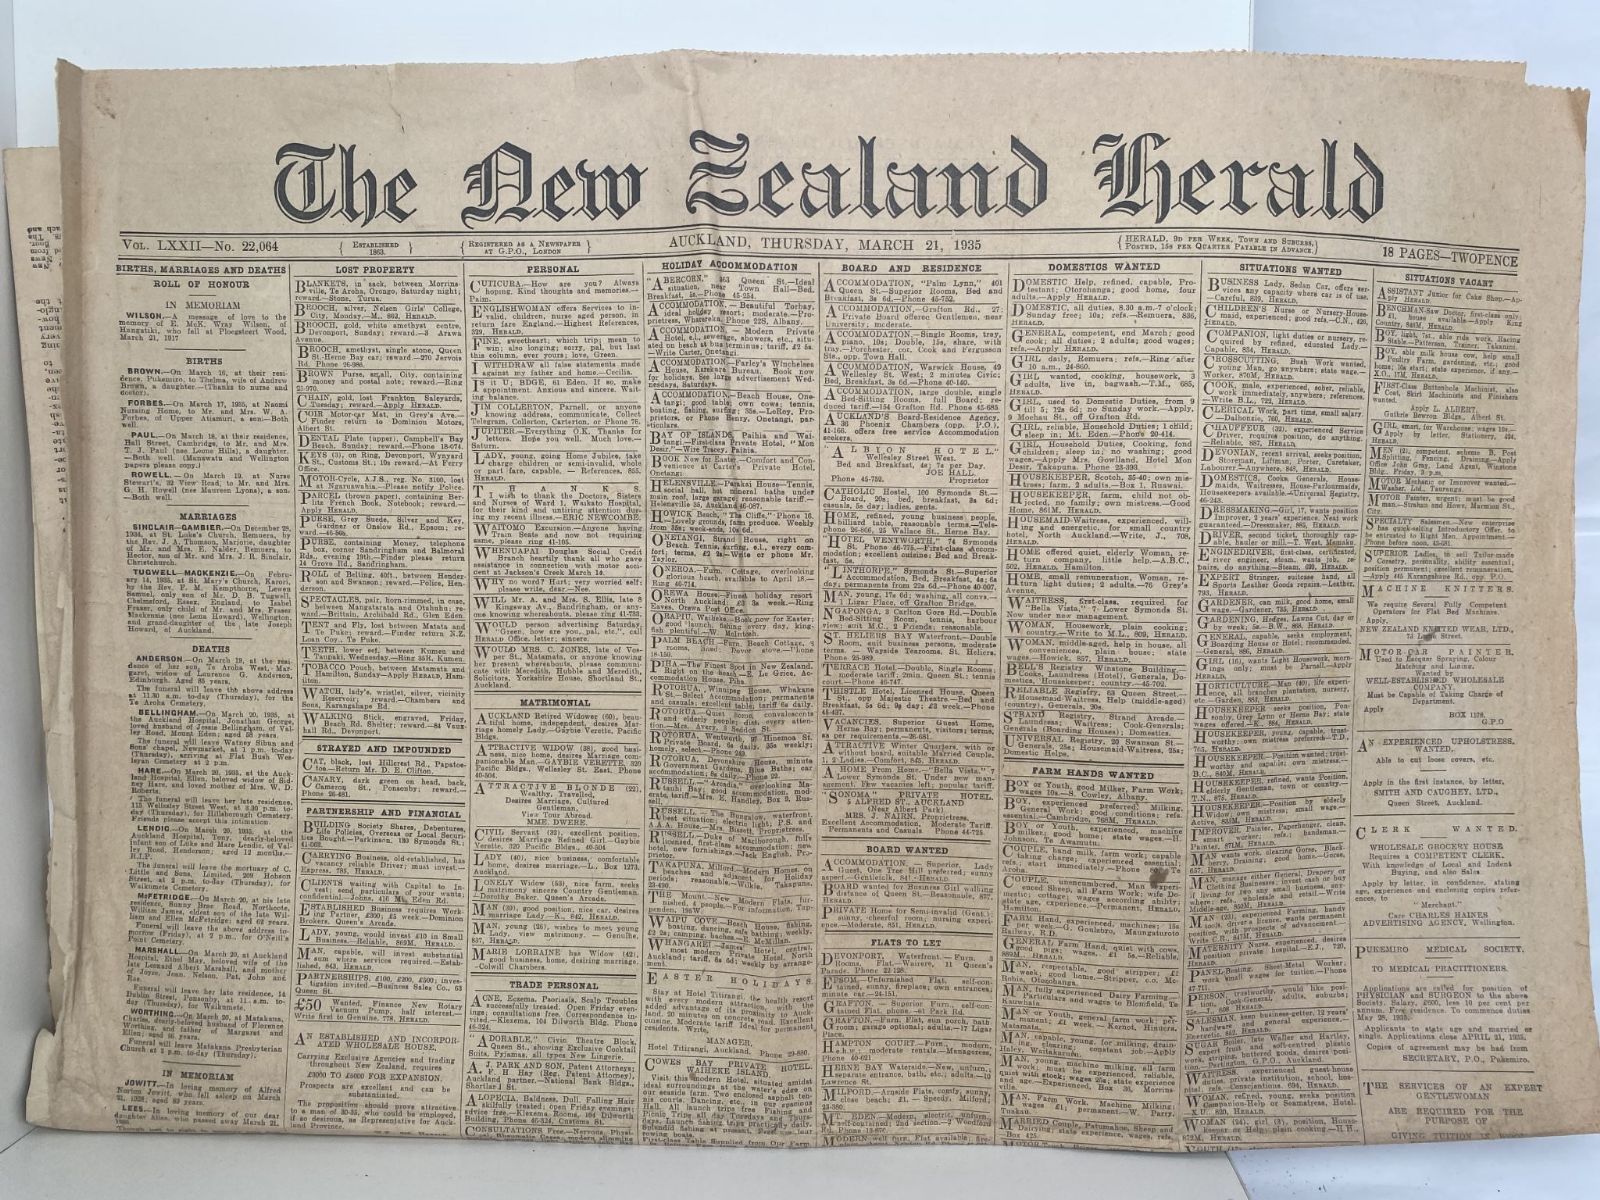 OLD NEWSPAPER: The New Zealand Herald, 21 March 1935